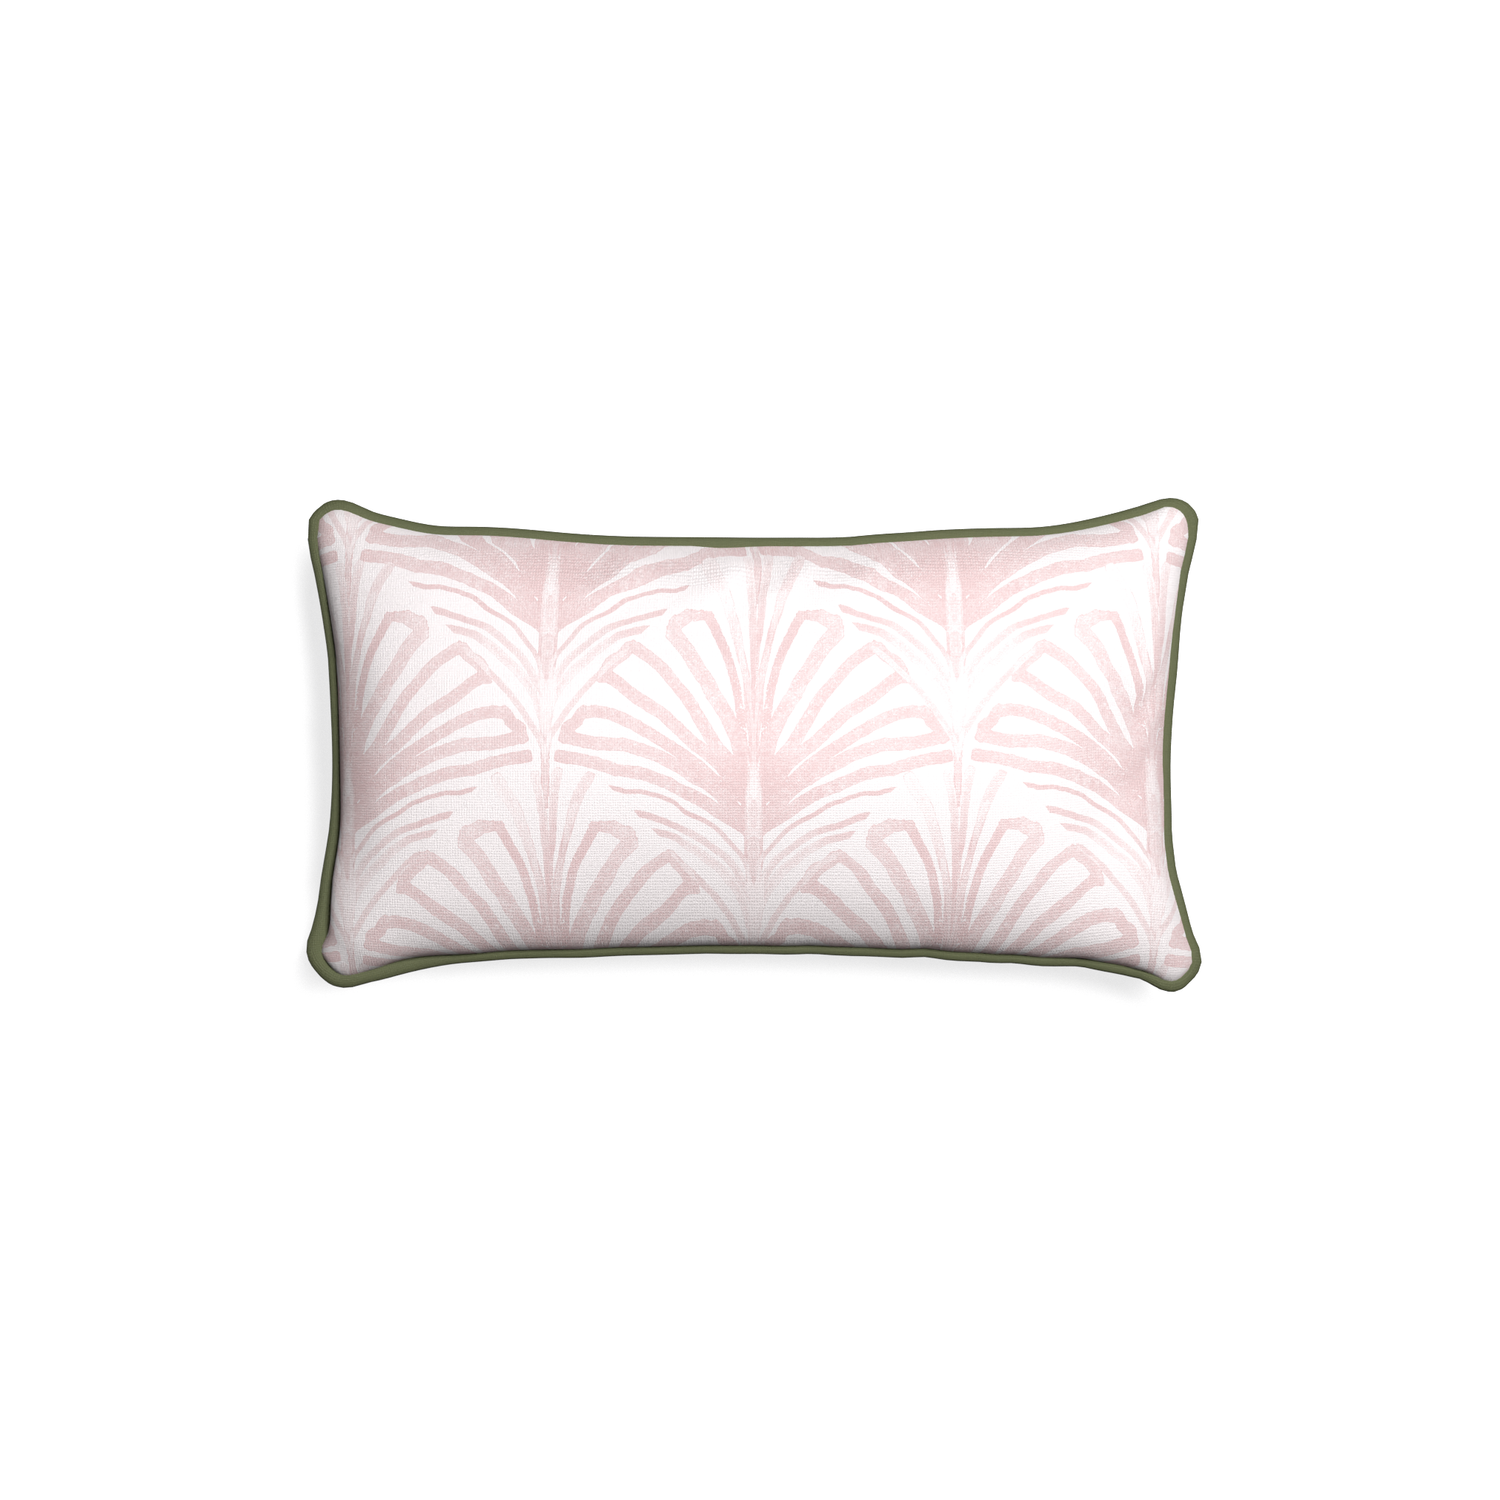 Petite-lumbar suzy rose custom rose pink palmpillow with f piping on white background